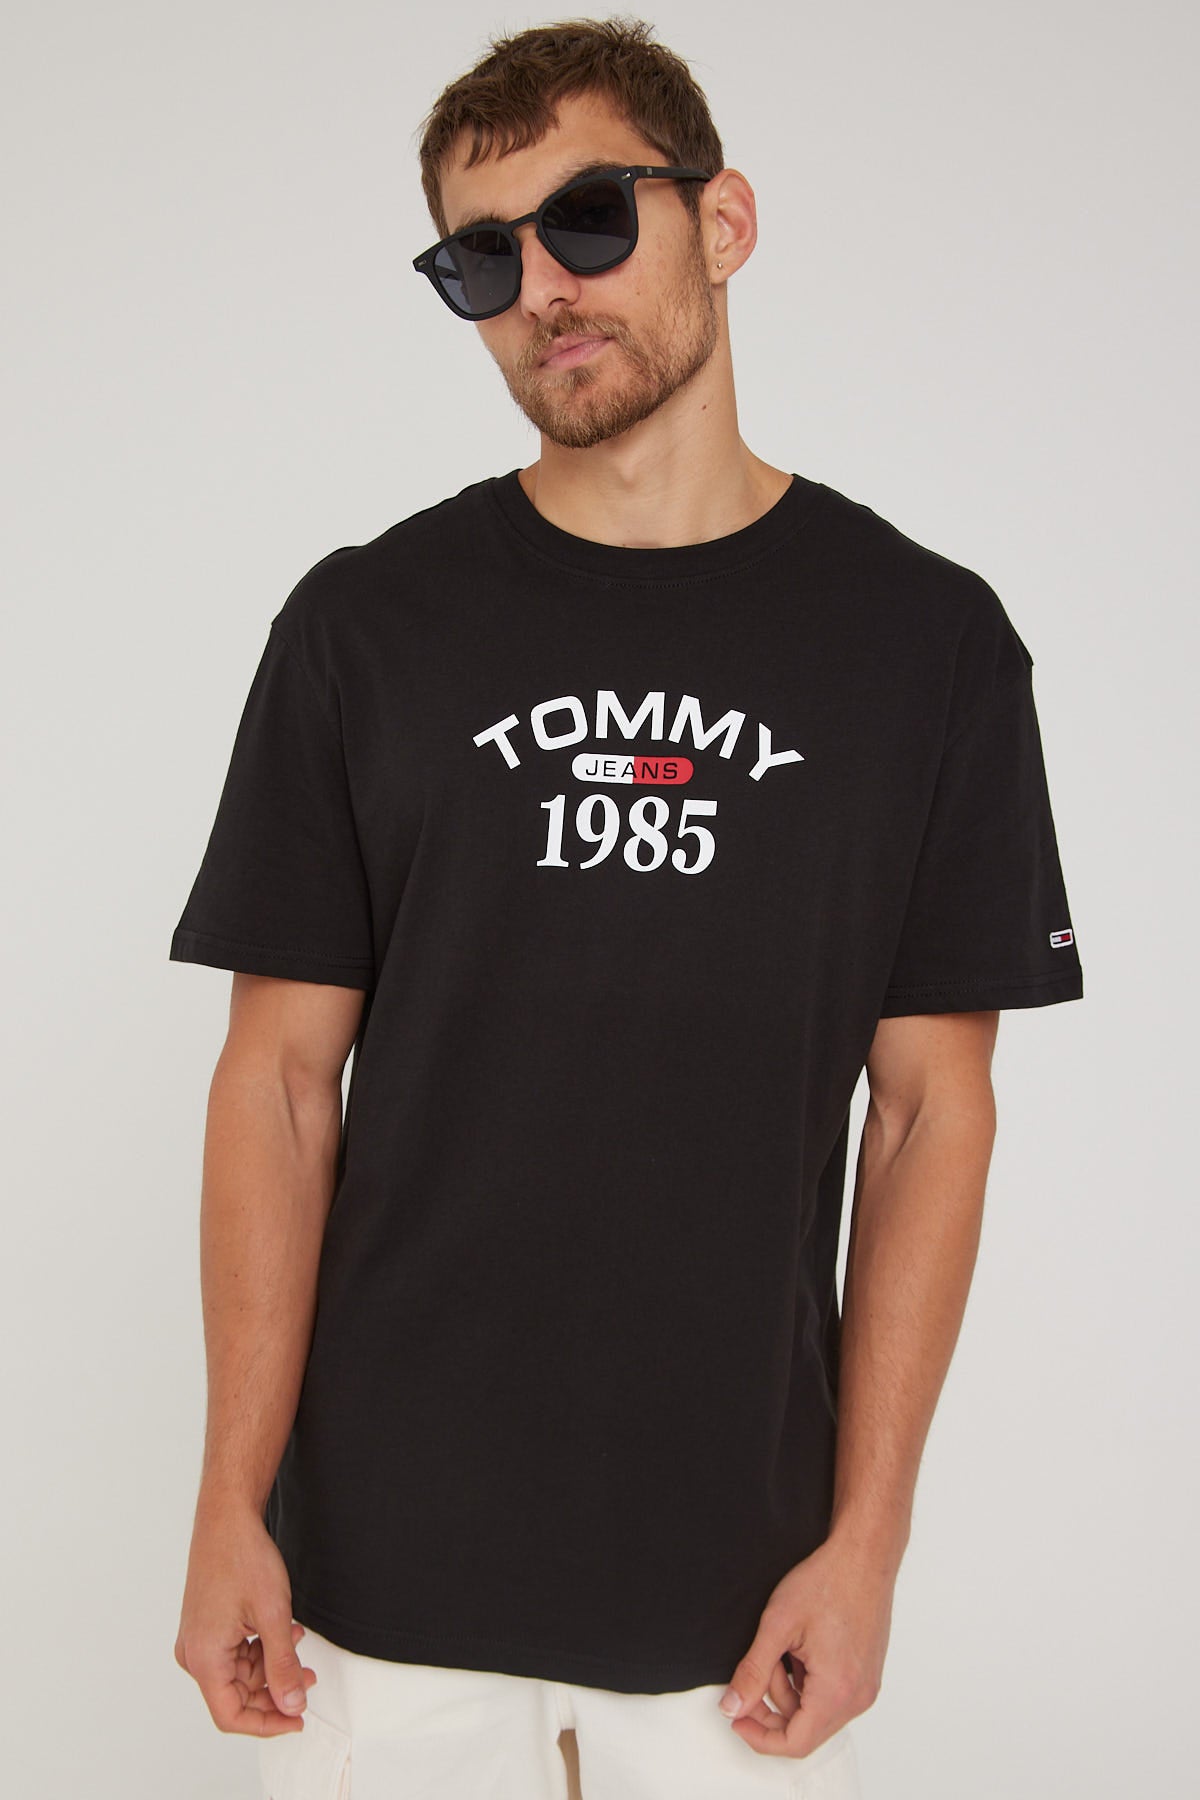 Store Flag TJM Athletic Jeans – Tommy Universal White CLSC Tee